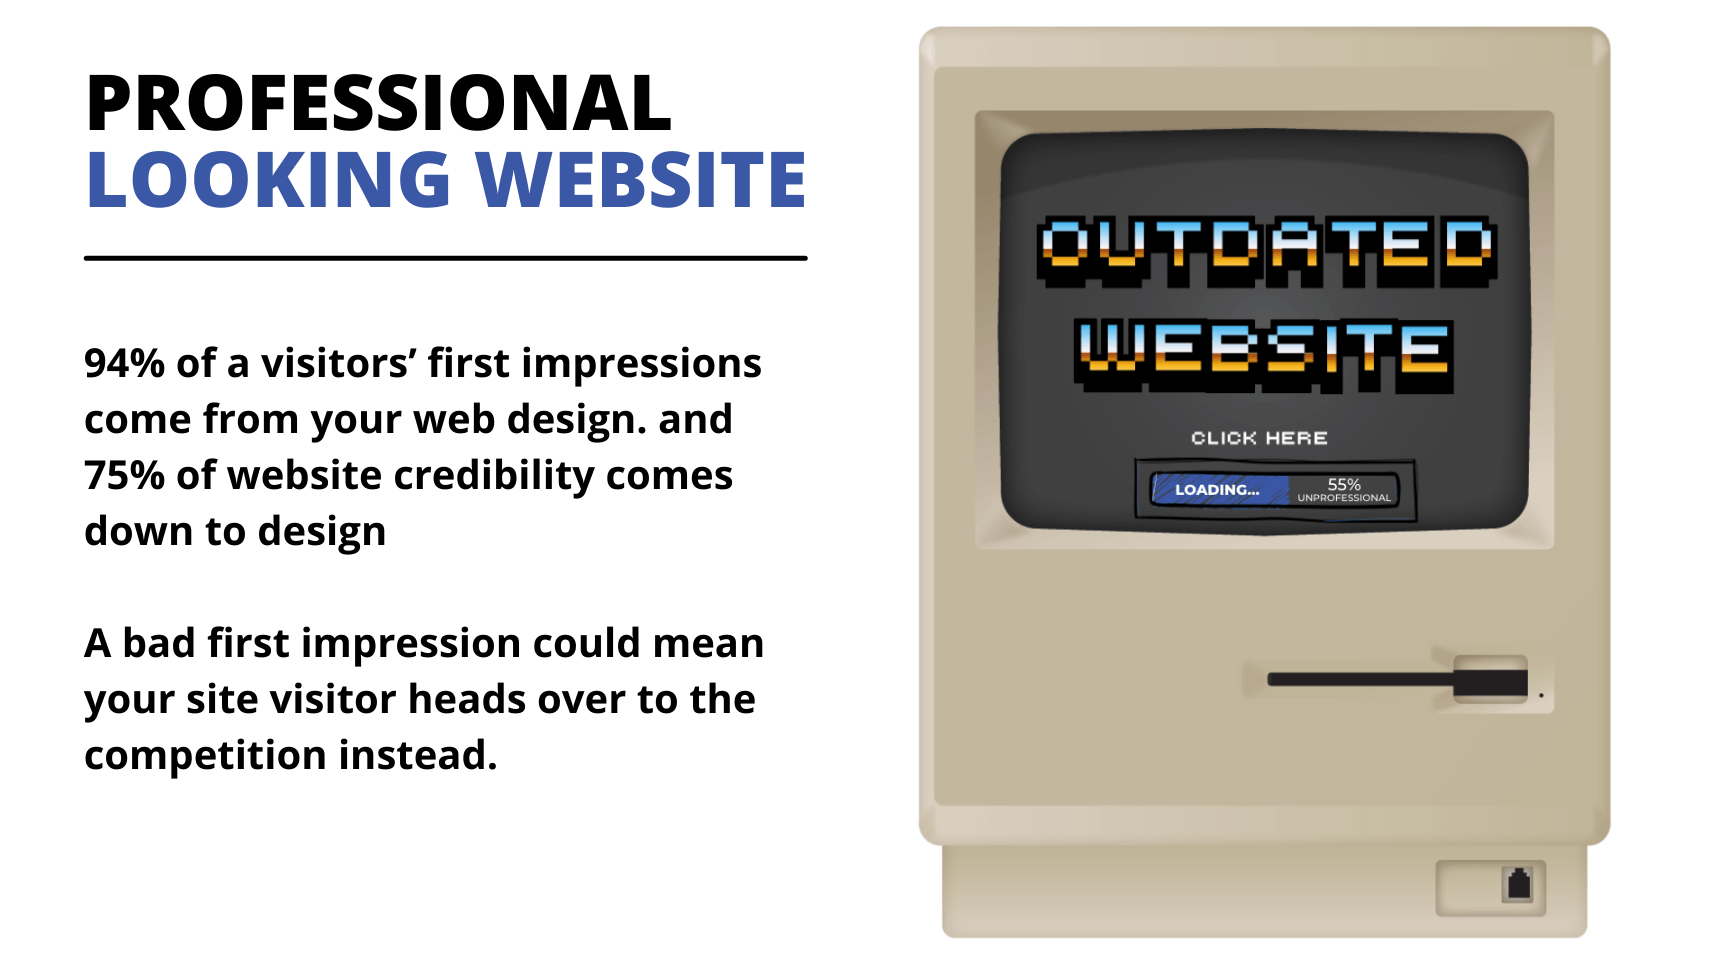 94% of a visitor’s first impressions relate to your site’s web design and 75% of website credibility comes down to design.